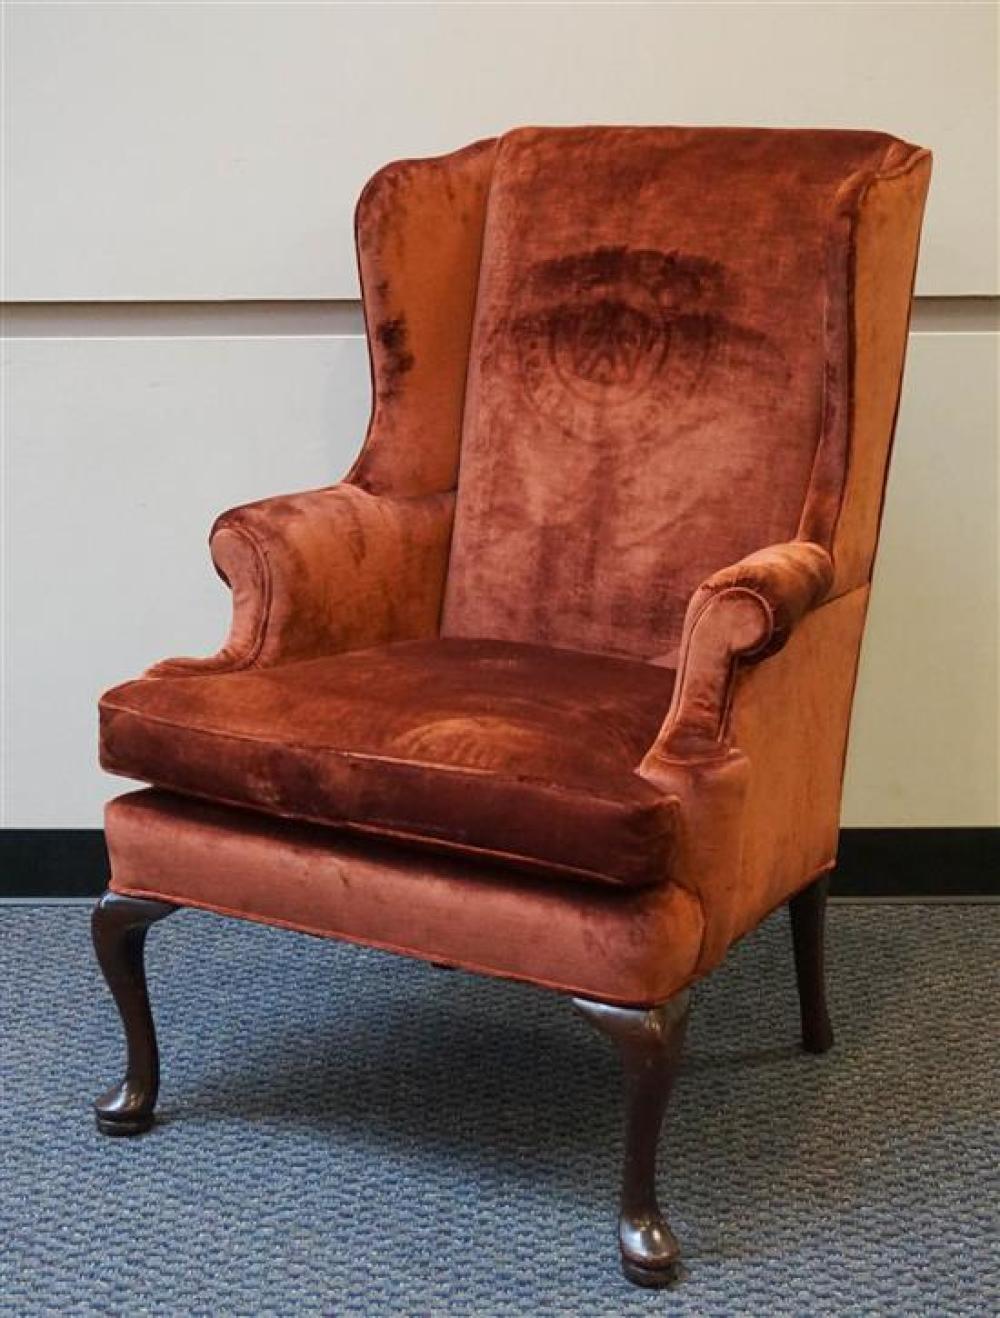 QUEEN ANNE STYLE MAHOGANY MAROON